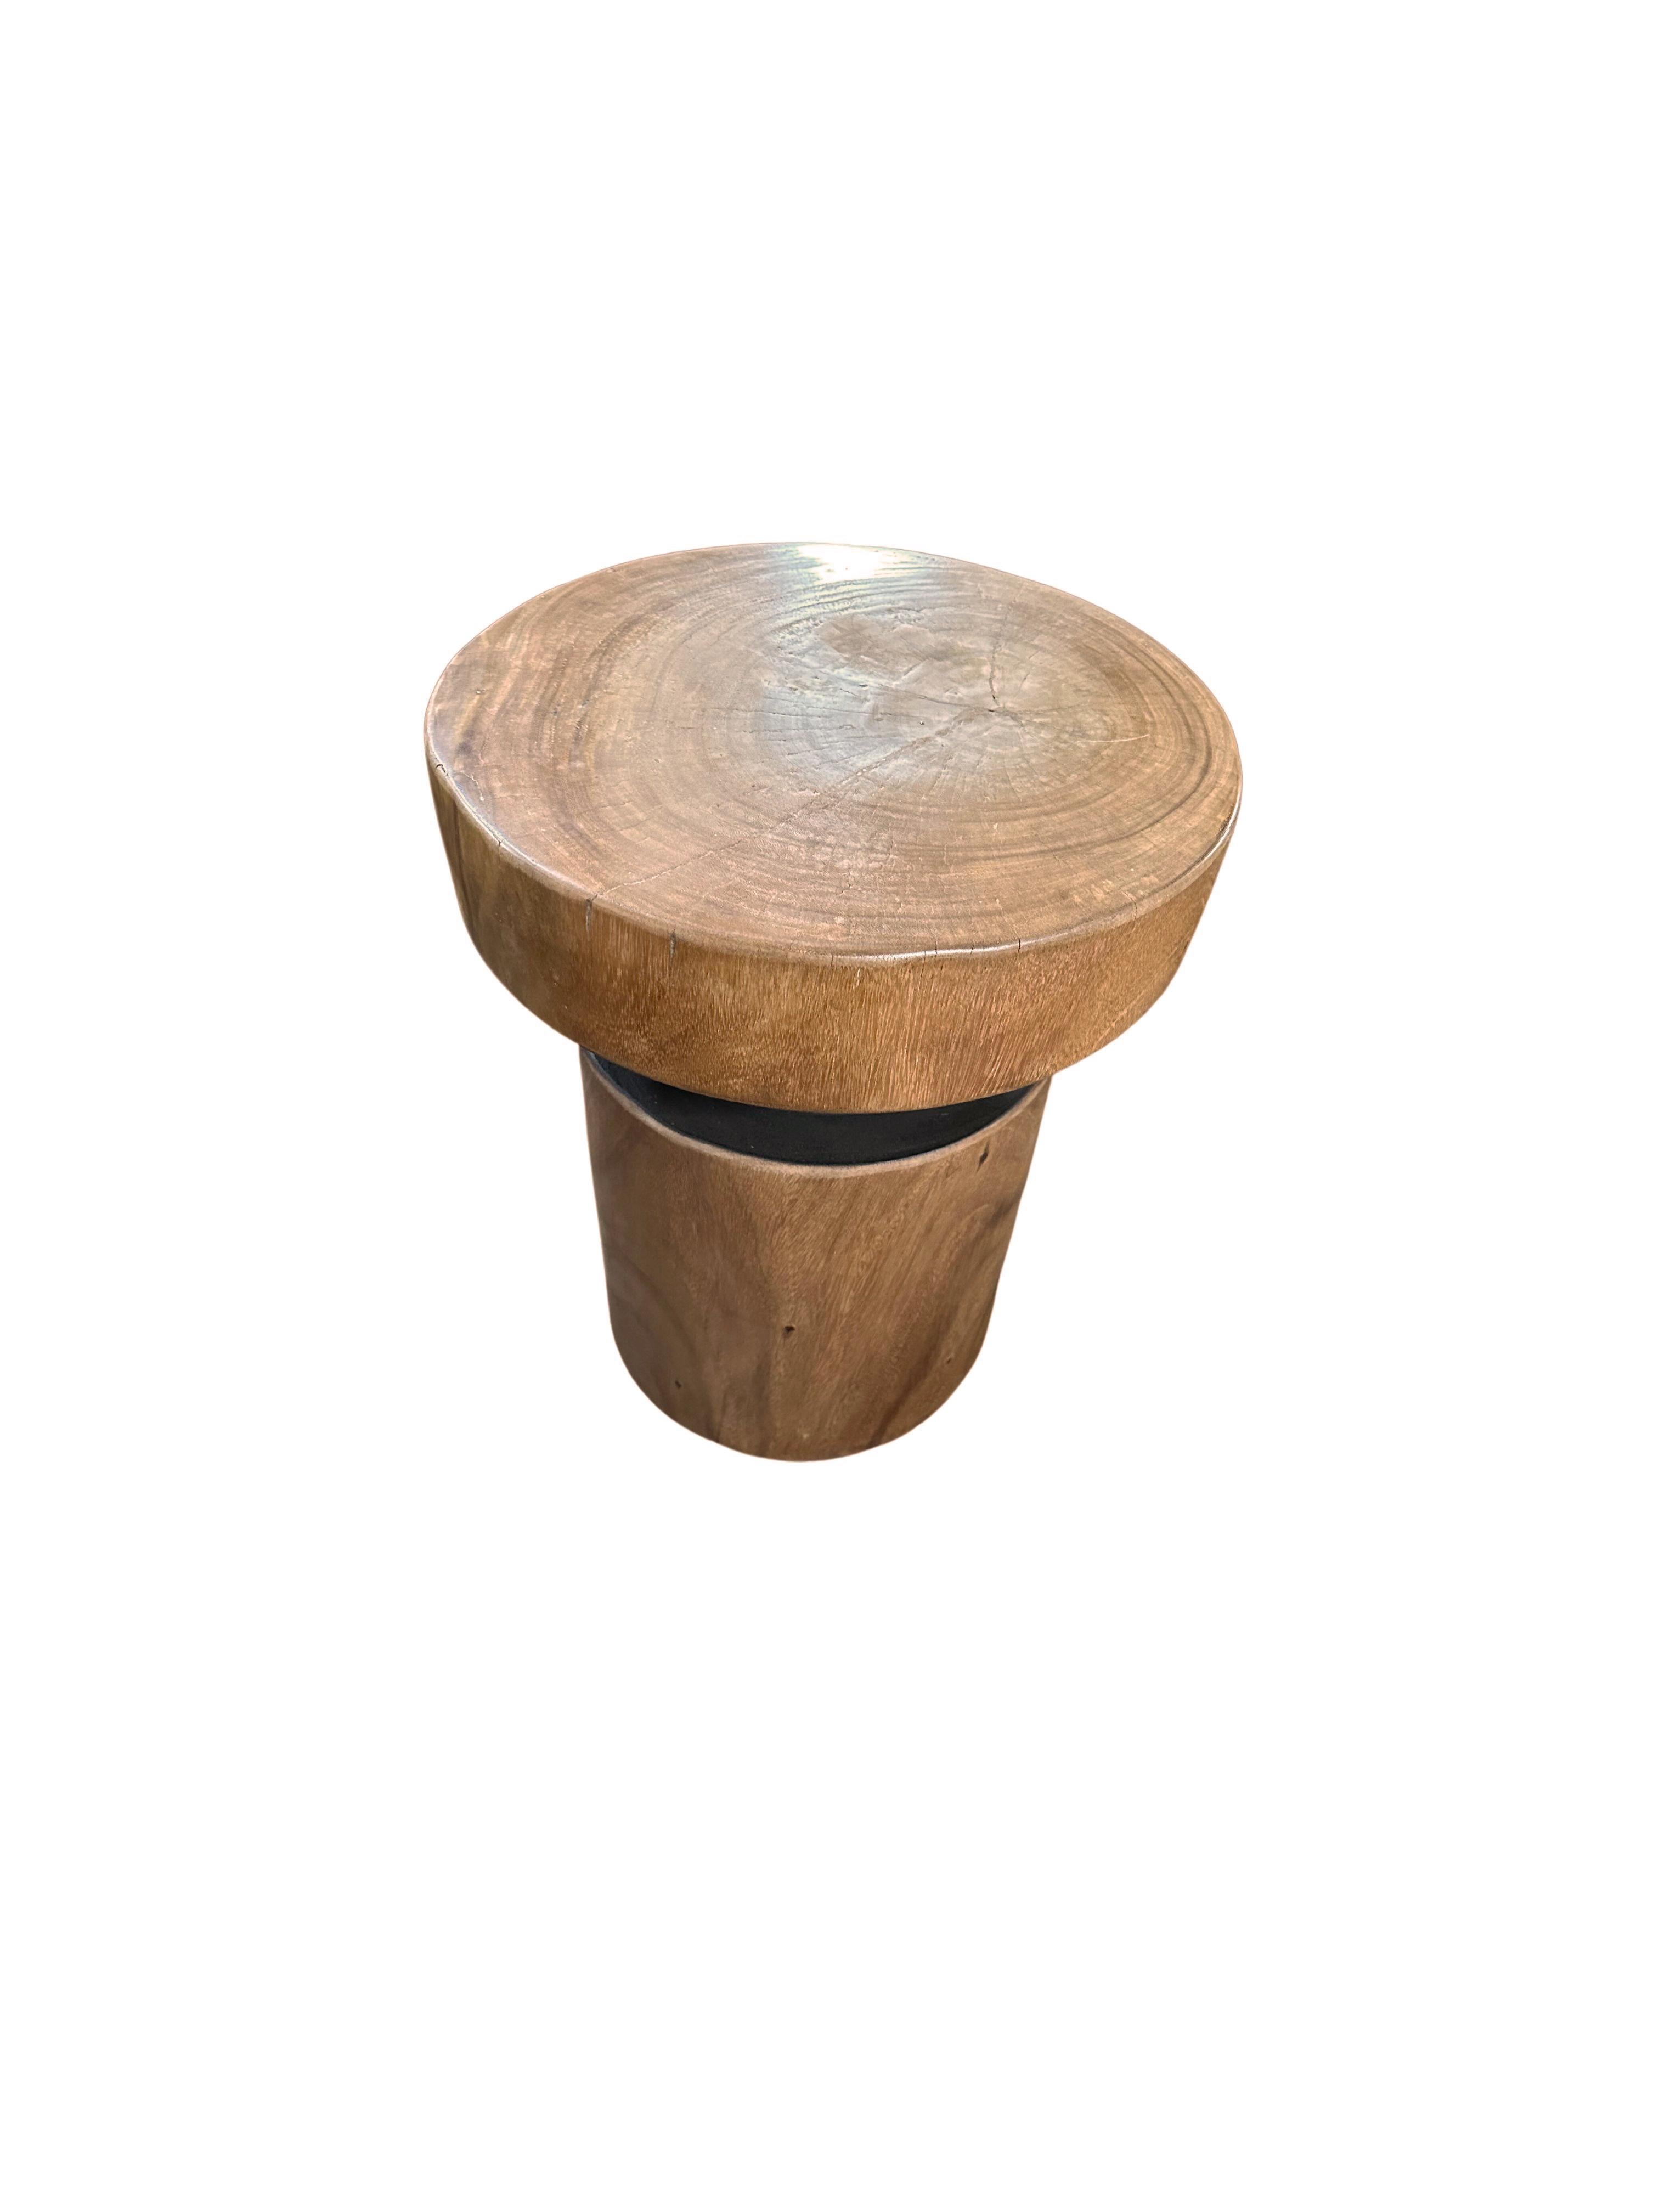 Organic Modern Sculptural Suar Wood Side Table, with Stunning Wood Textures, Modern Organic For Sale